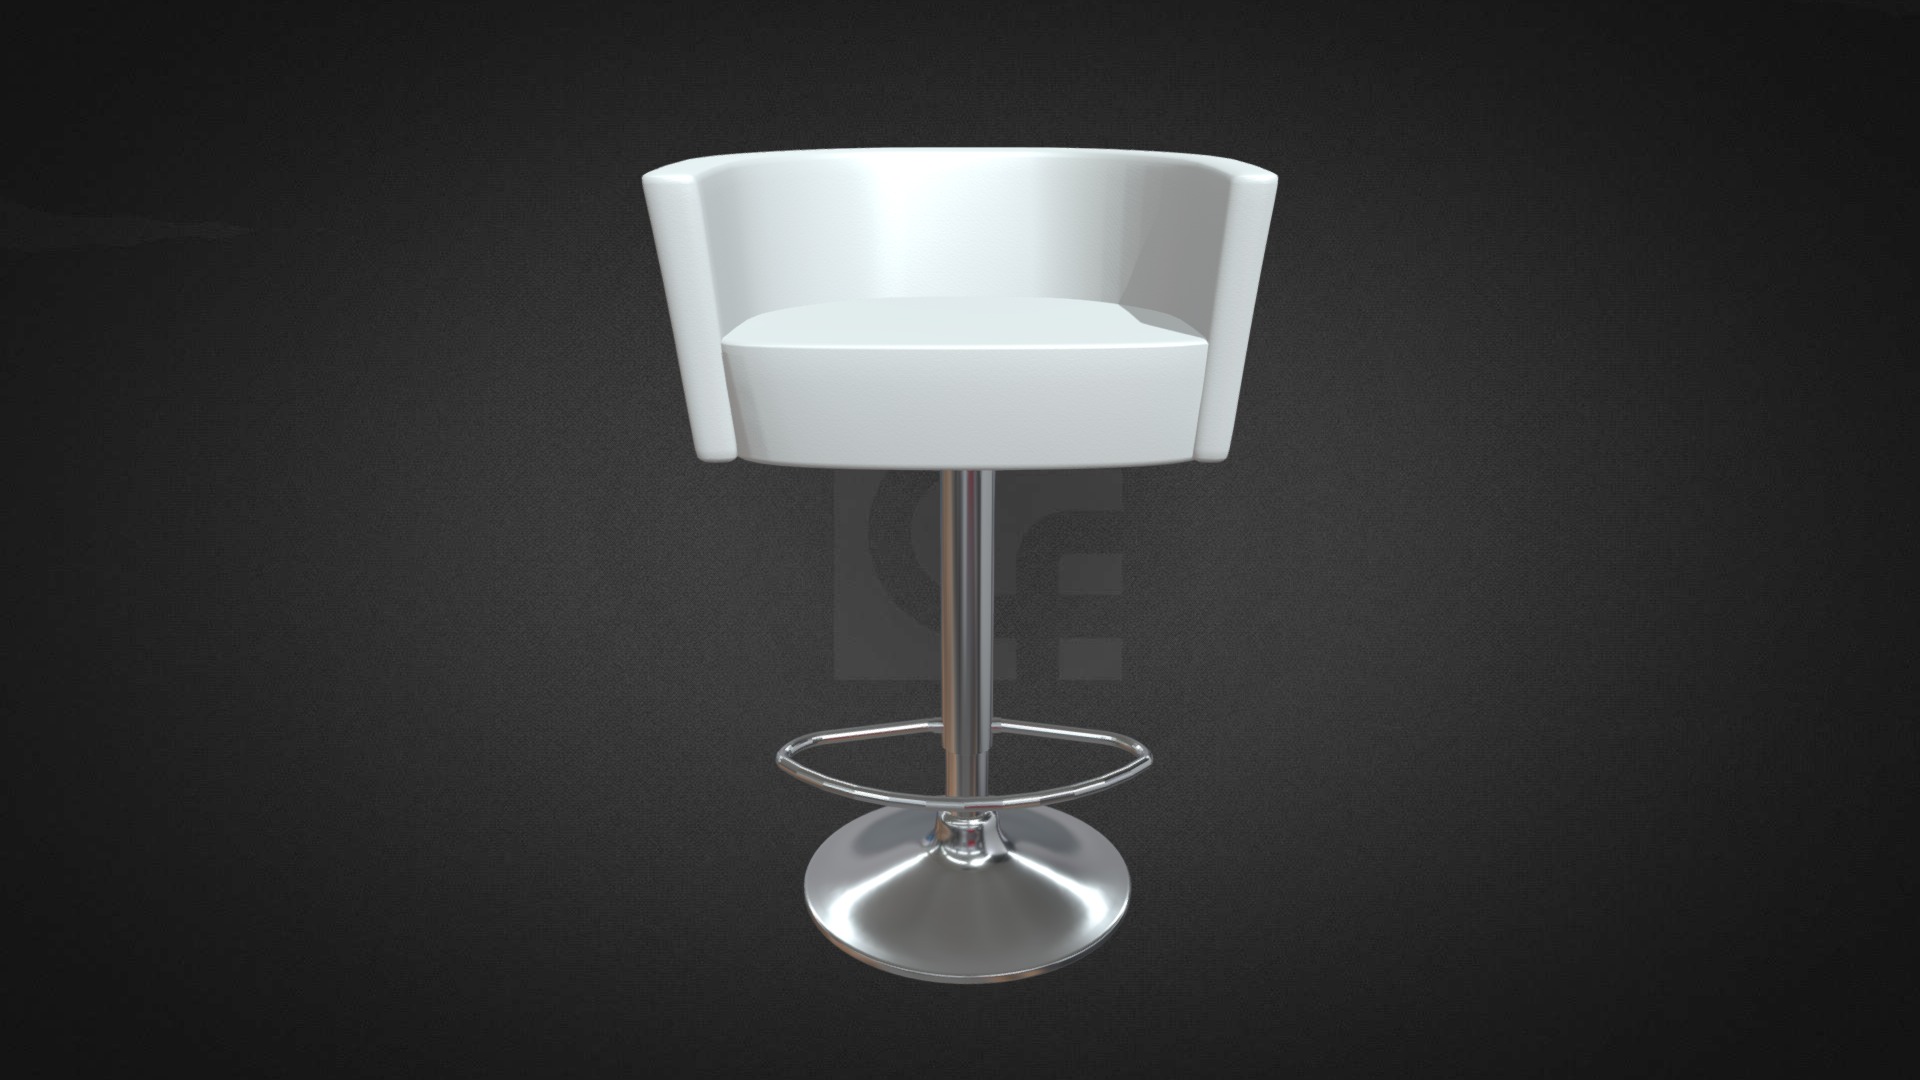 3D model Dott Stool Hire - This is a 3D model of the Dott Stool Hire. The 3D model is about a white lamp with a shade.